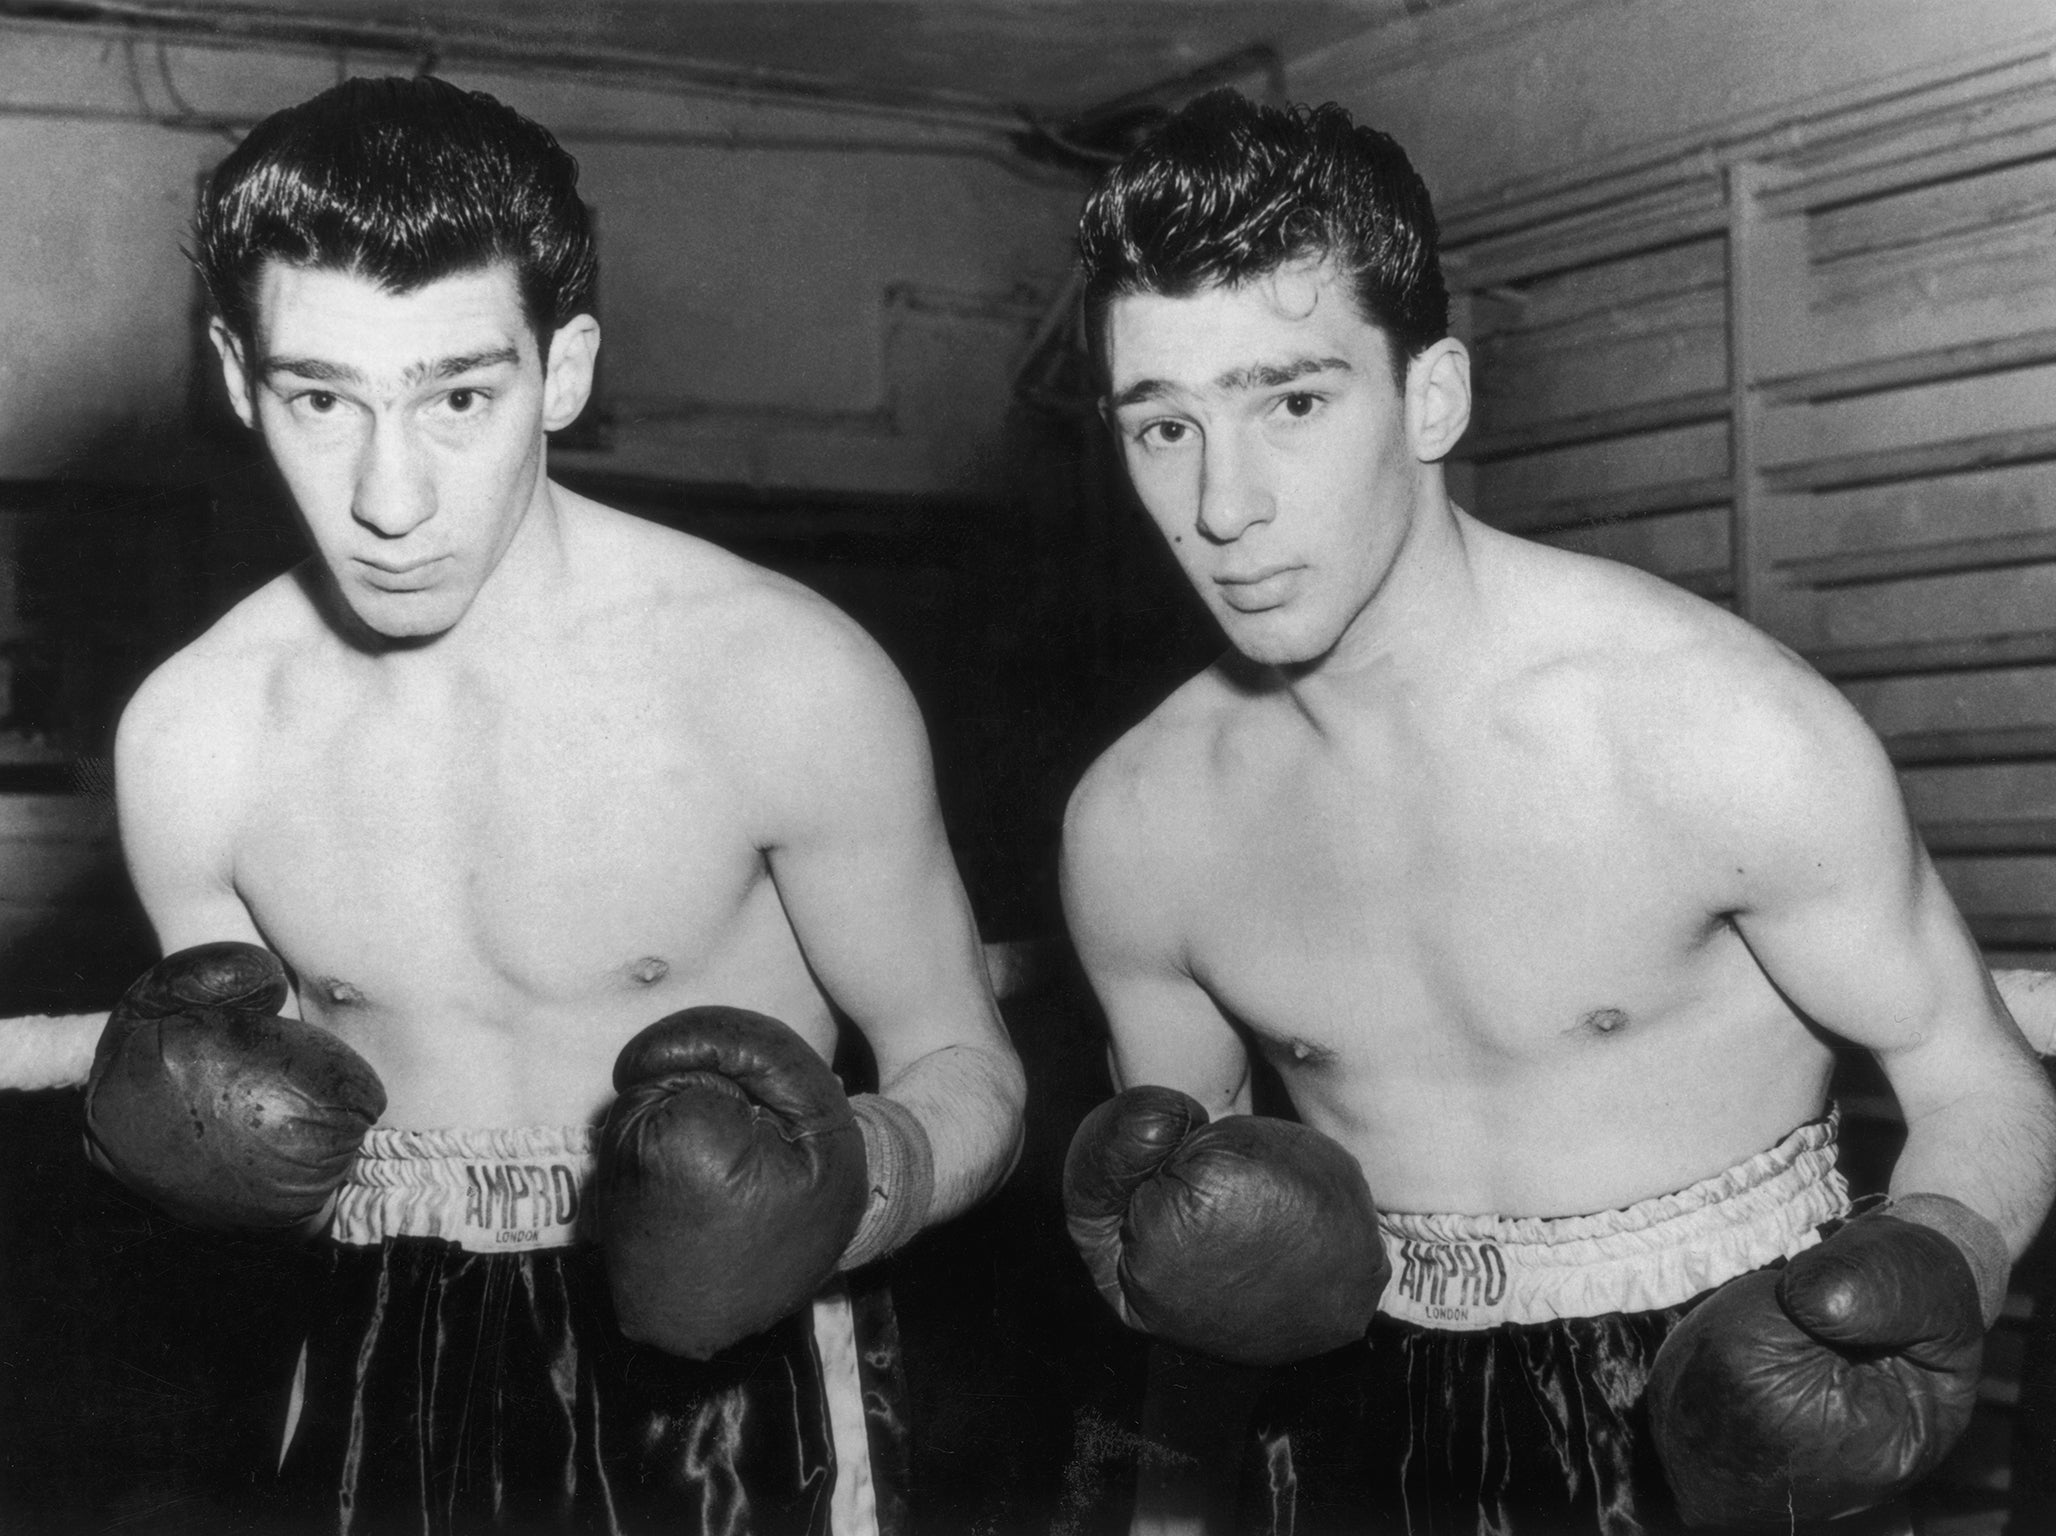 Ronnie (left) and Reggie began their careers in the boxing ring